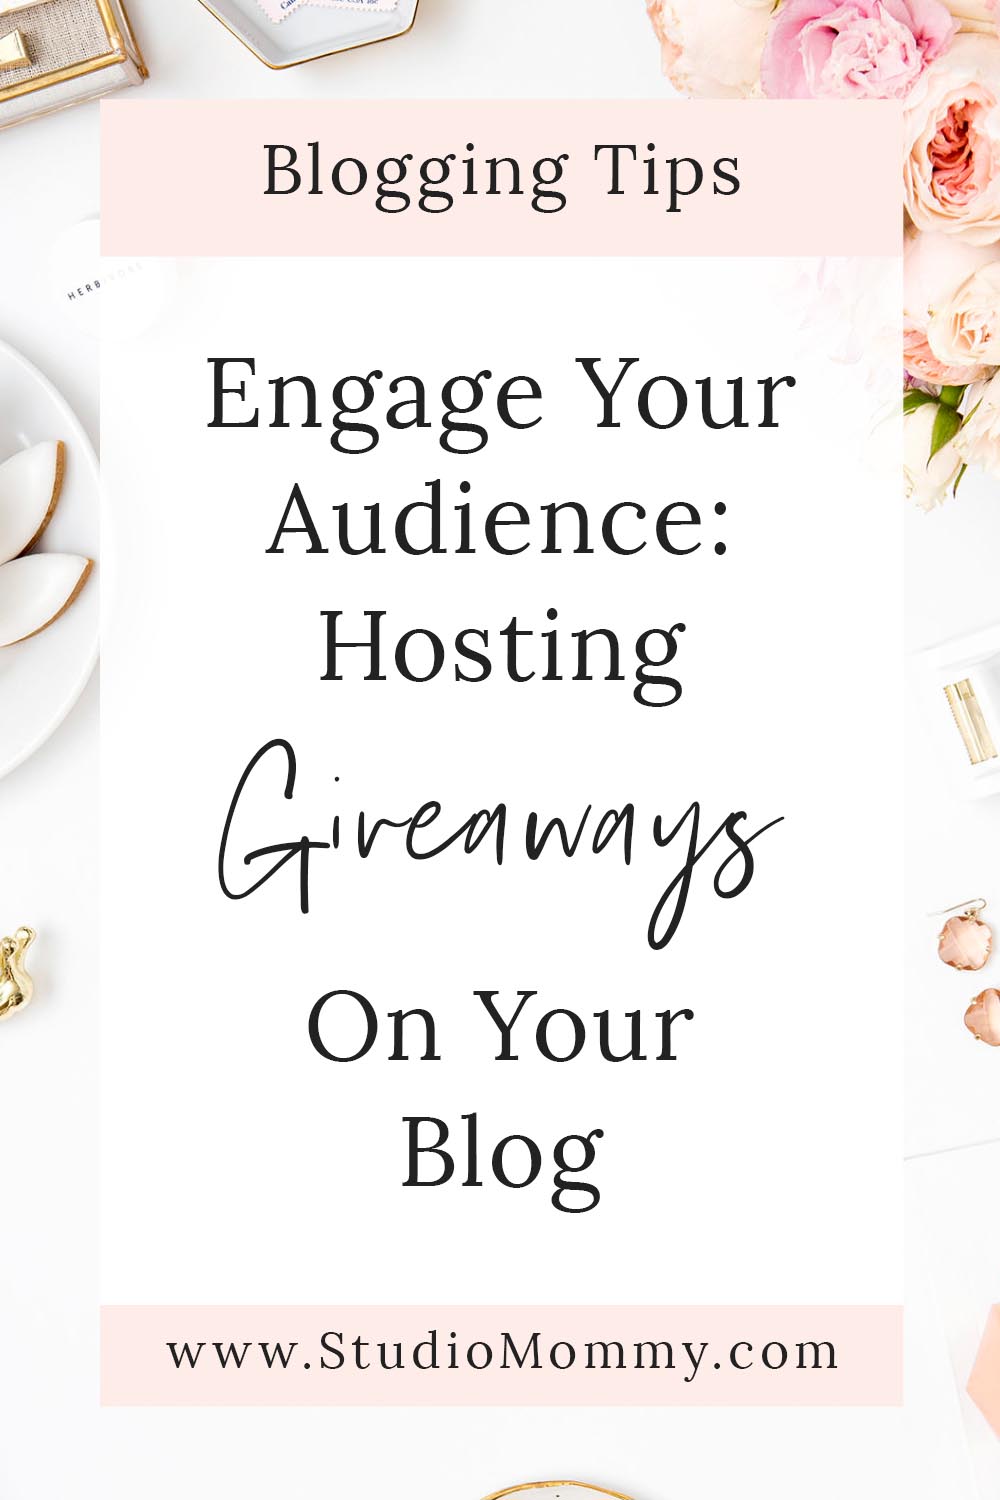 If you are looking for ways to increase your blog's presence, get more traffic and social shares while engaging your audience, try hosting giveaways on your blog. Giveaways attract new readers, reward loyal followers and can promote your products and services. Giveaways are a win-win for everyone involved. Here are some tips for hosting giveaways on your blog.